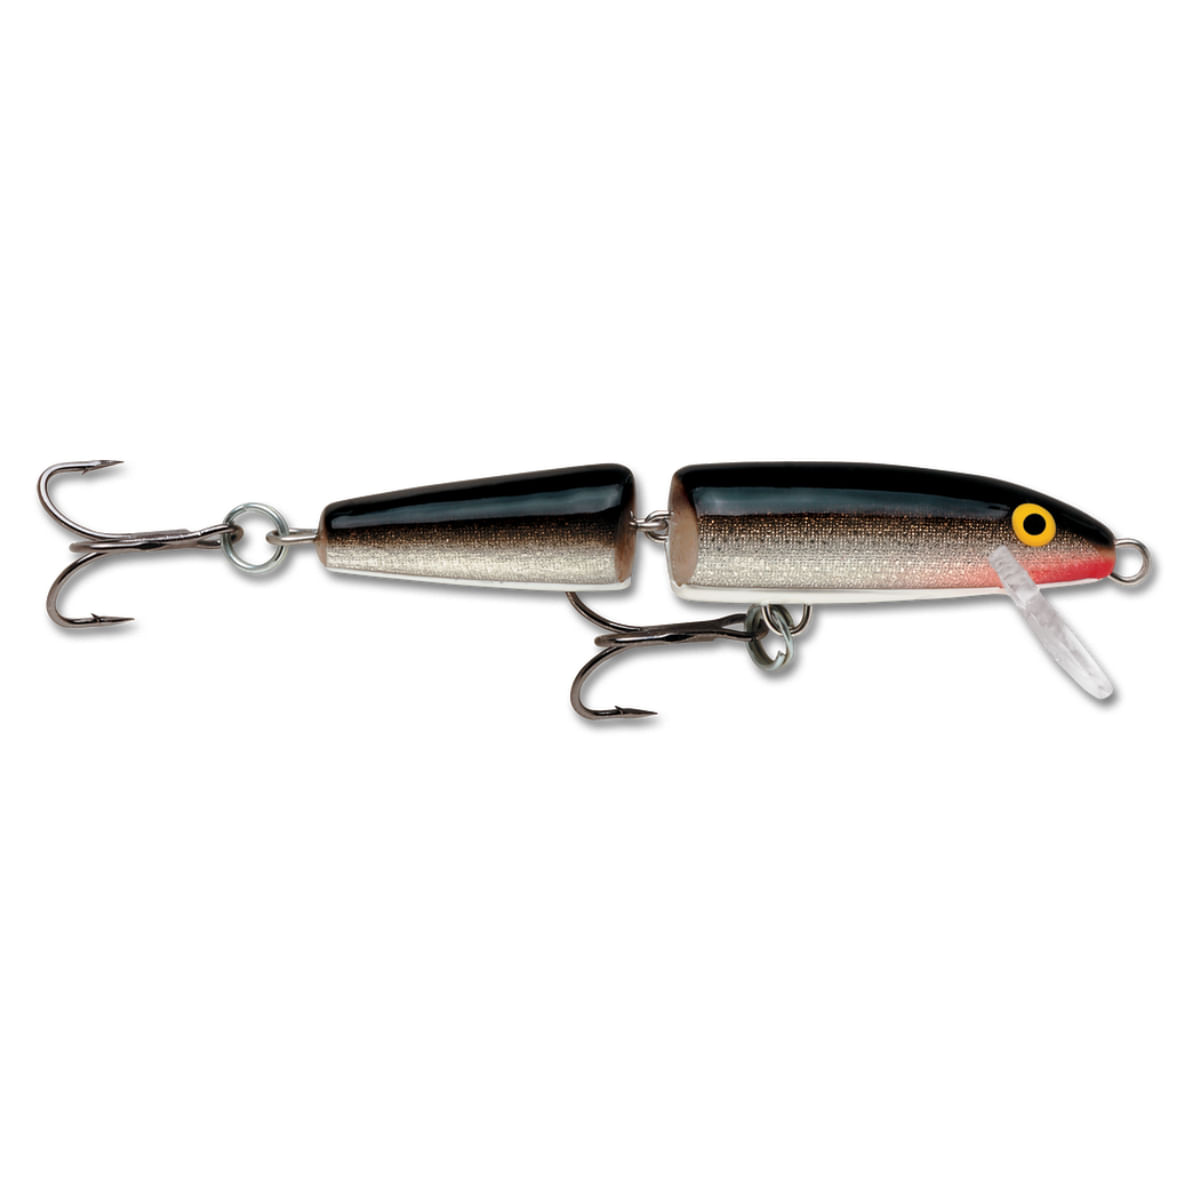 Rapala Jointed Lure - Als.com